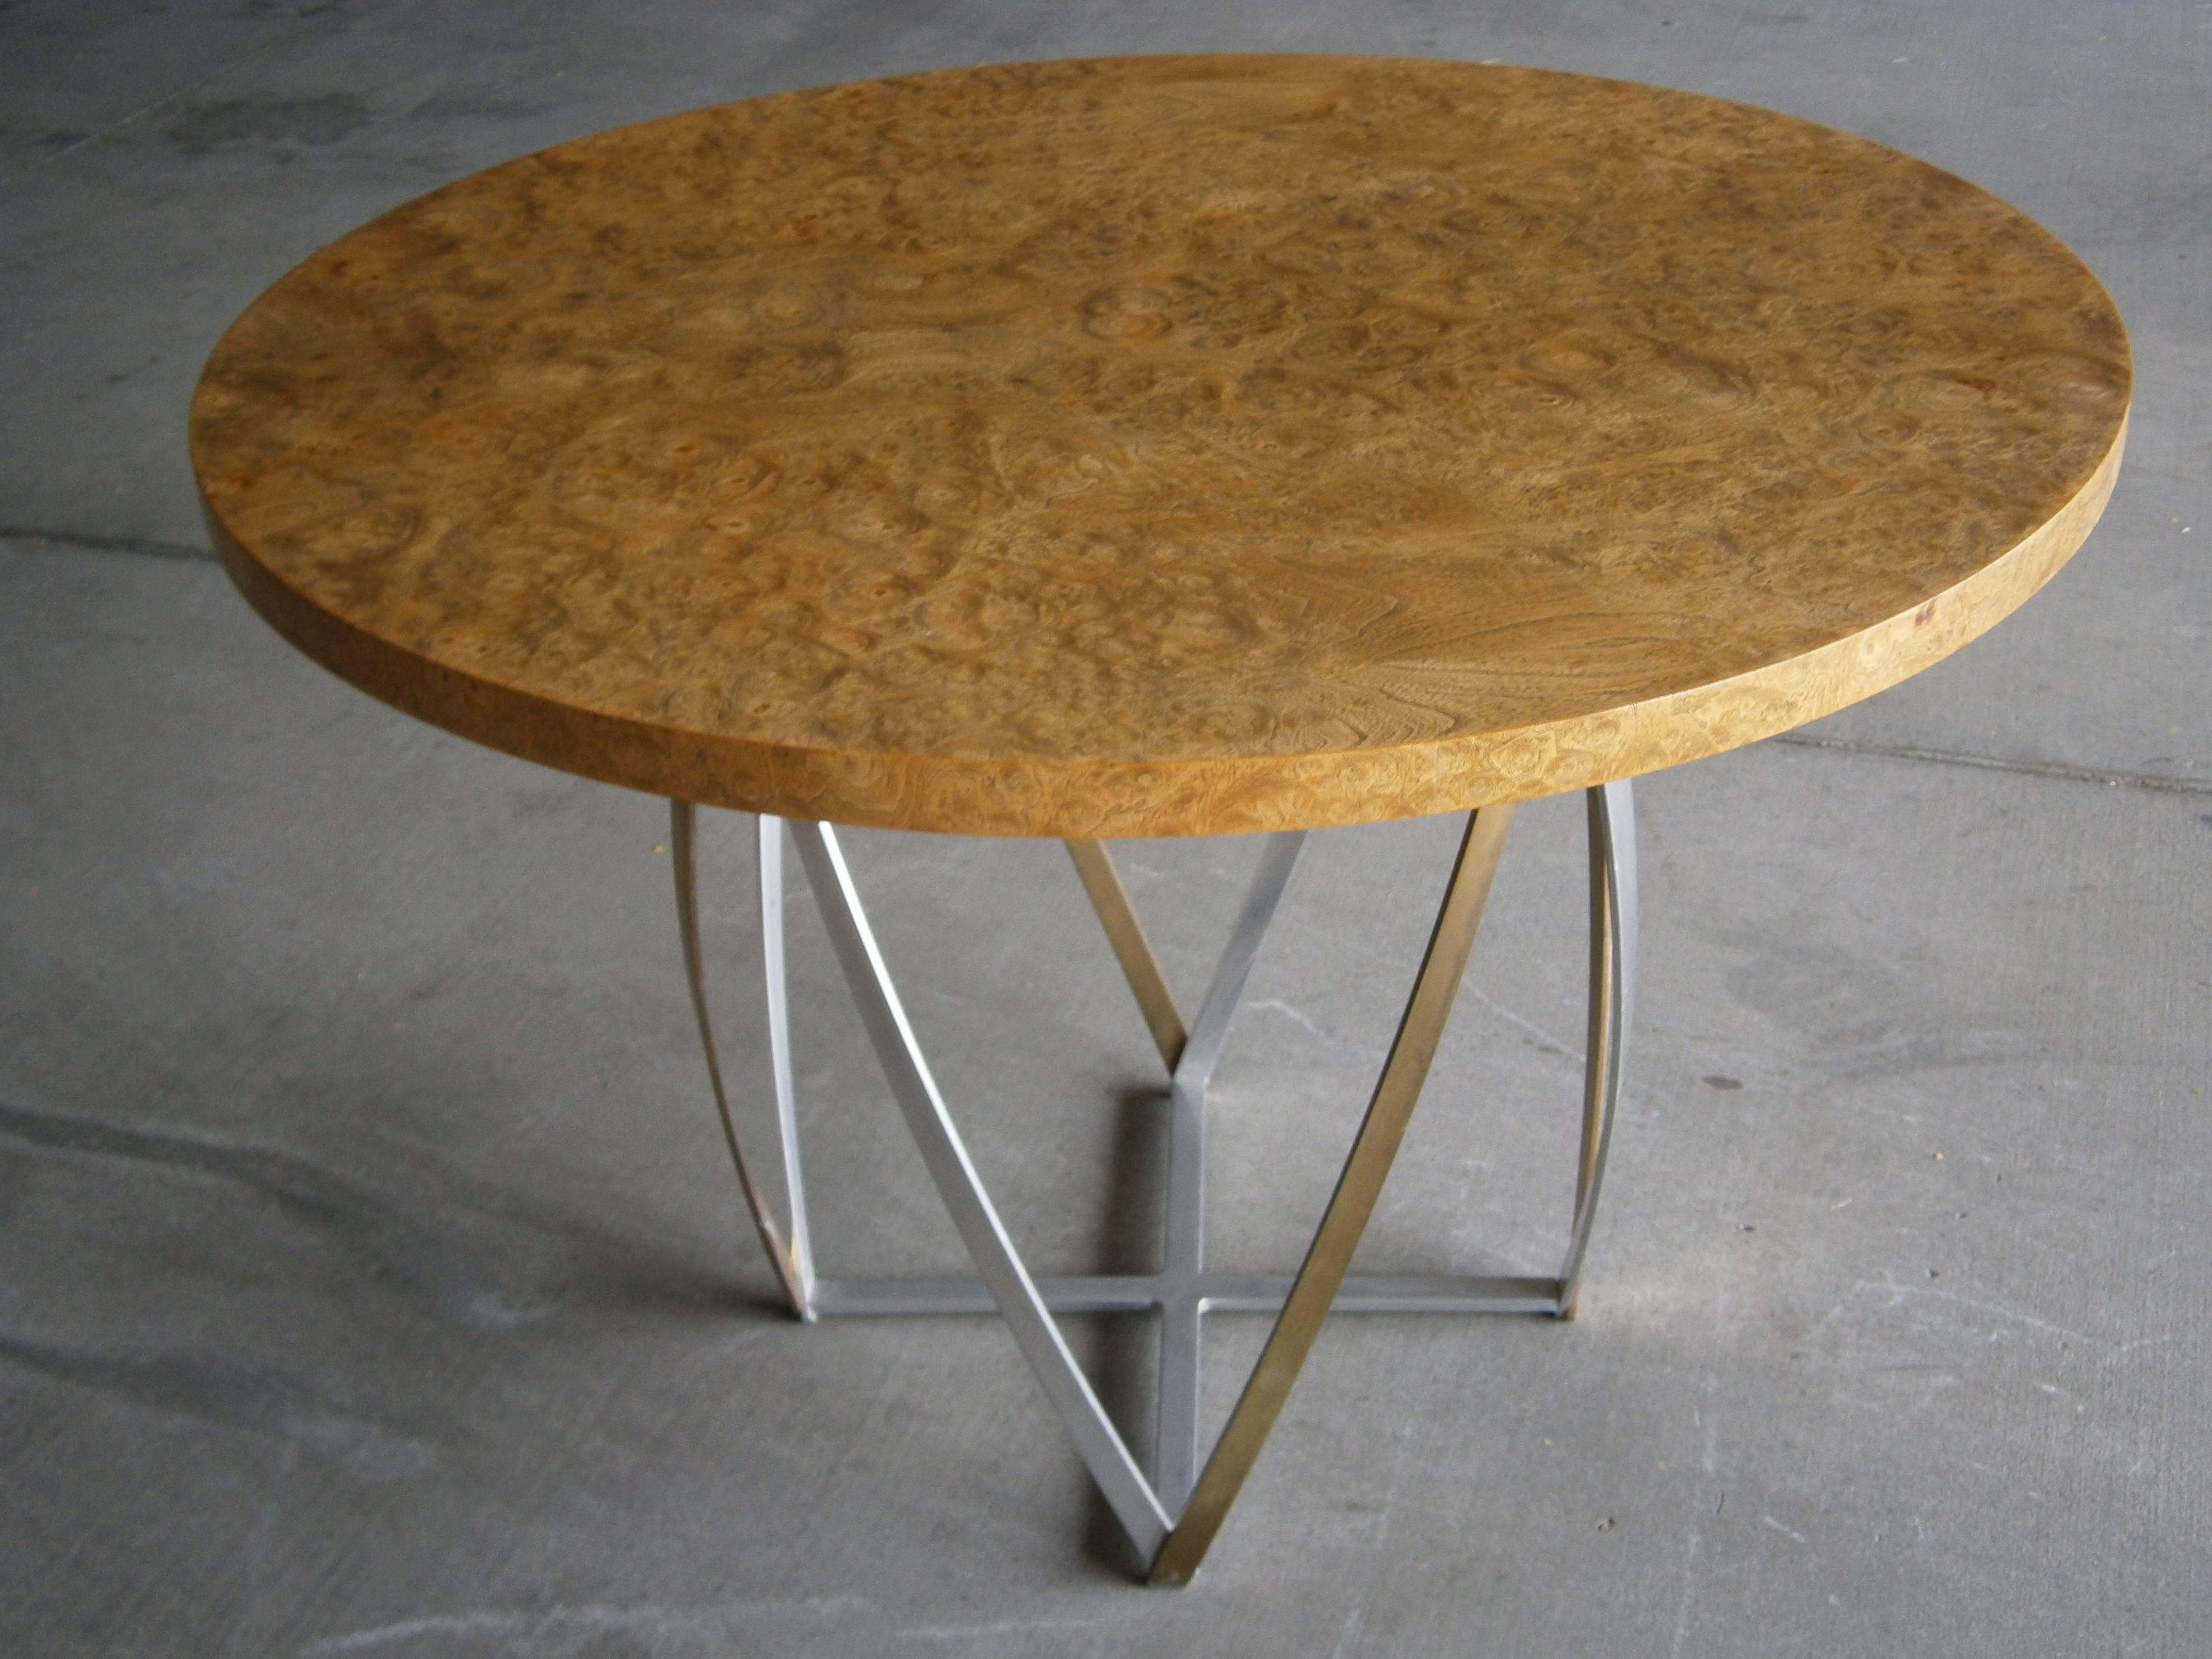 Mid-20th Century Aluminum and Brass Based Burled wood Circular Table by John Vesey  C. 1960s For Sale